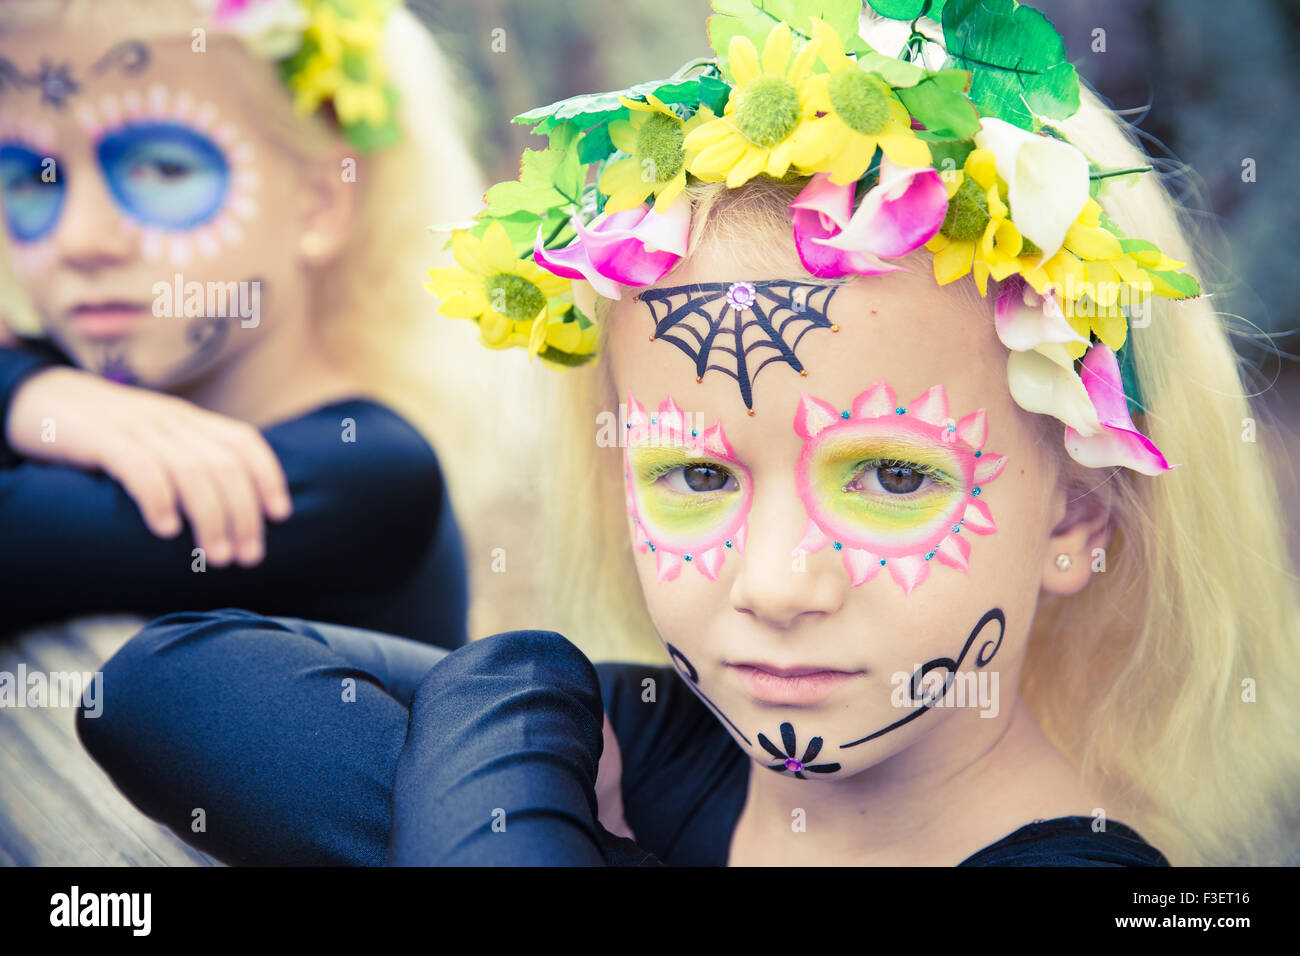 Halloween face painting stock photo. Image of greuesome - 56999570